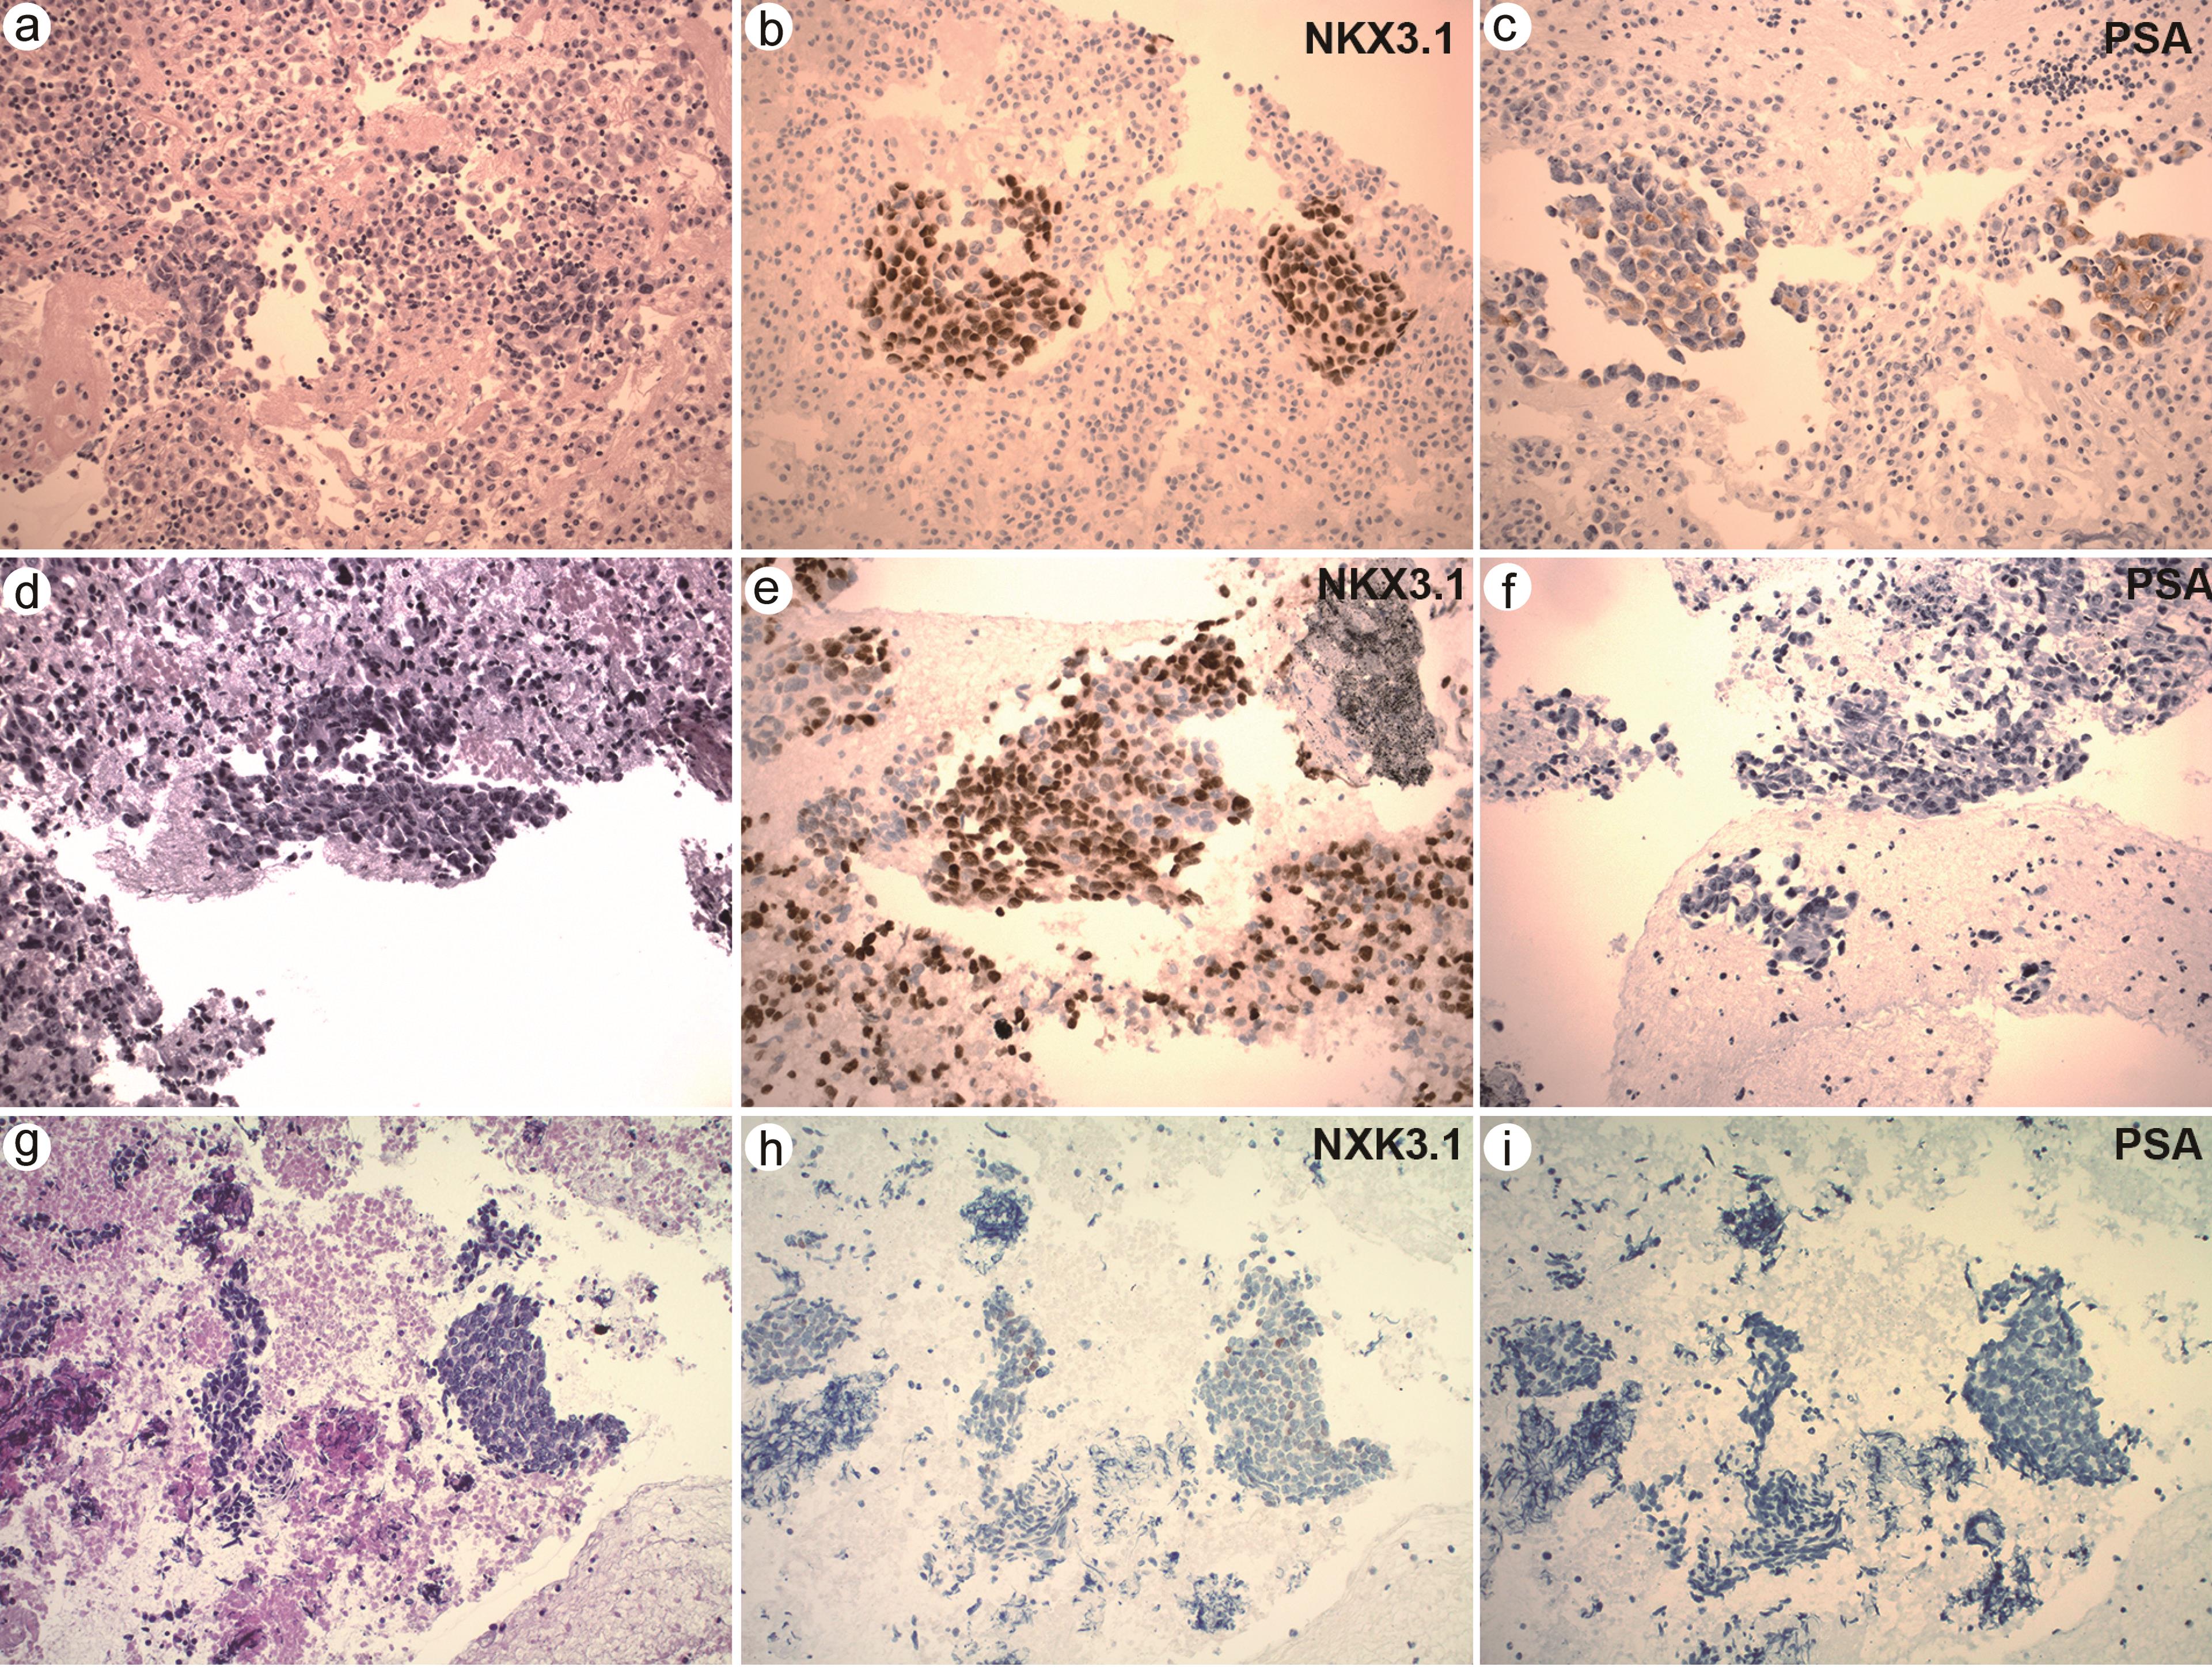 a–c: A representative case of metastatic prostatic adenocarcinoma (a) with positive NKX3.1 (b) and positive PSA (c). d–f: A representative case of metastatic prostatic adenocarcinoma (d) with positive NKX3.1 (e) but negative PSA (f). g–i: The only non-metastatic prostatic carcinoma with focal weak NKX3.1 positivity but negative PSA. a–i: 200×.